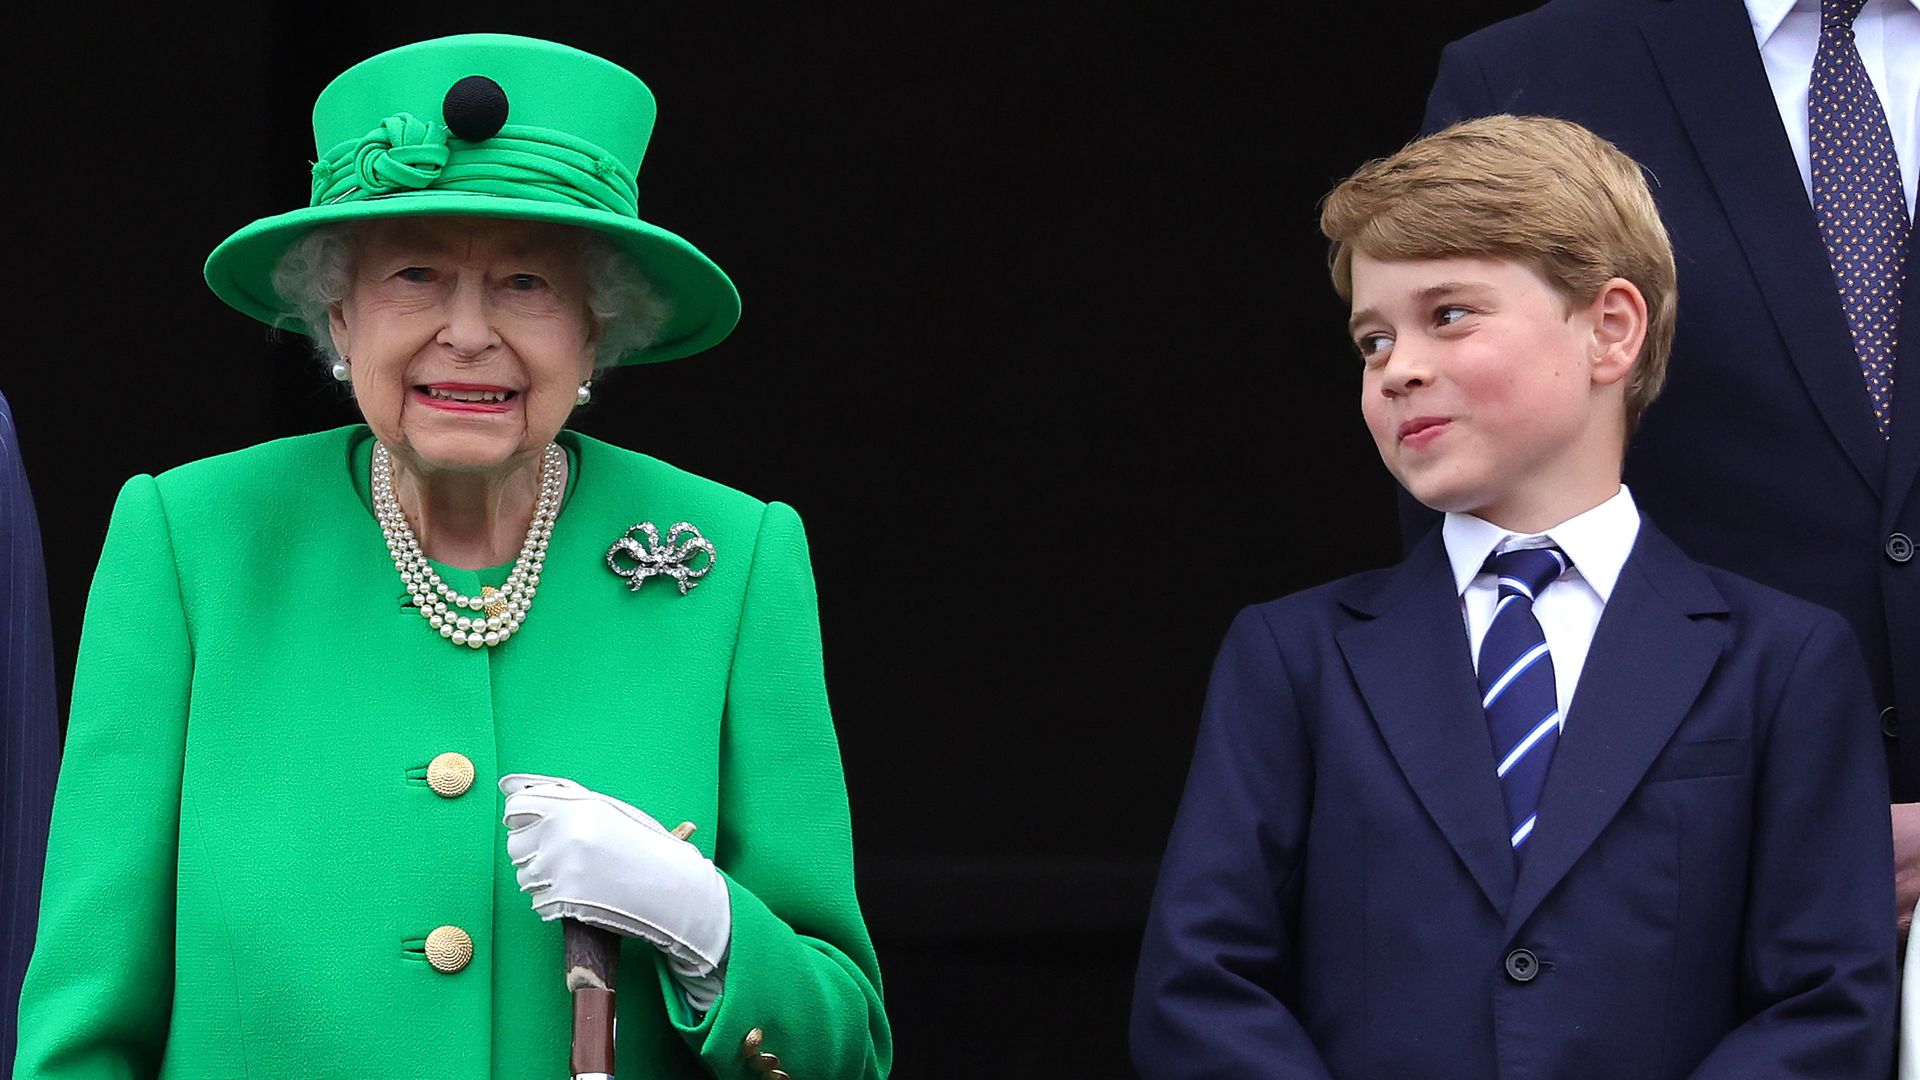 Prince George and Queen Elizabeth on the balcony of Buckingham Palace